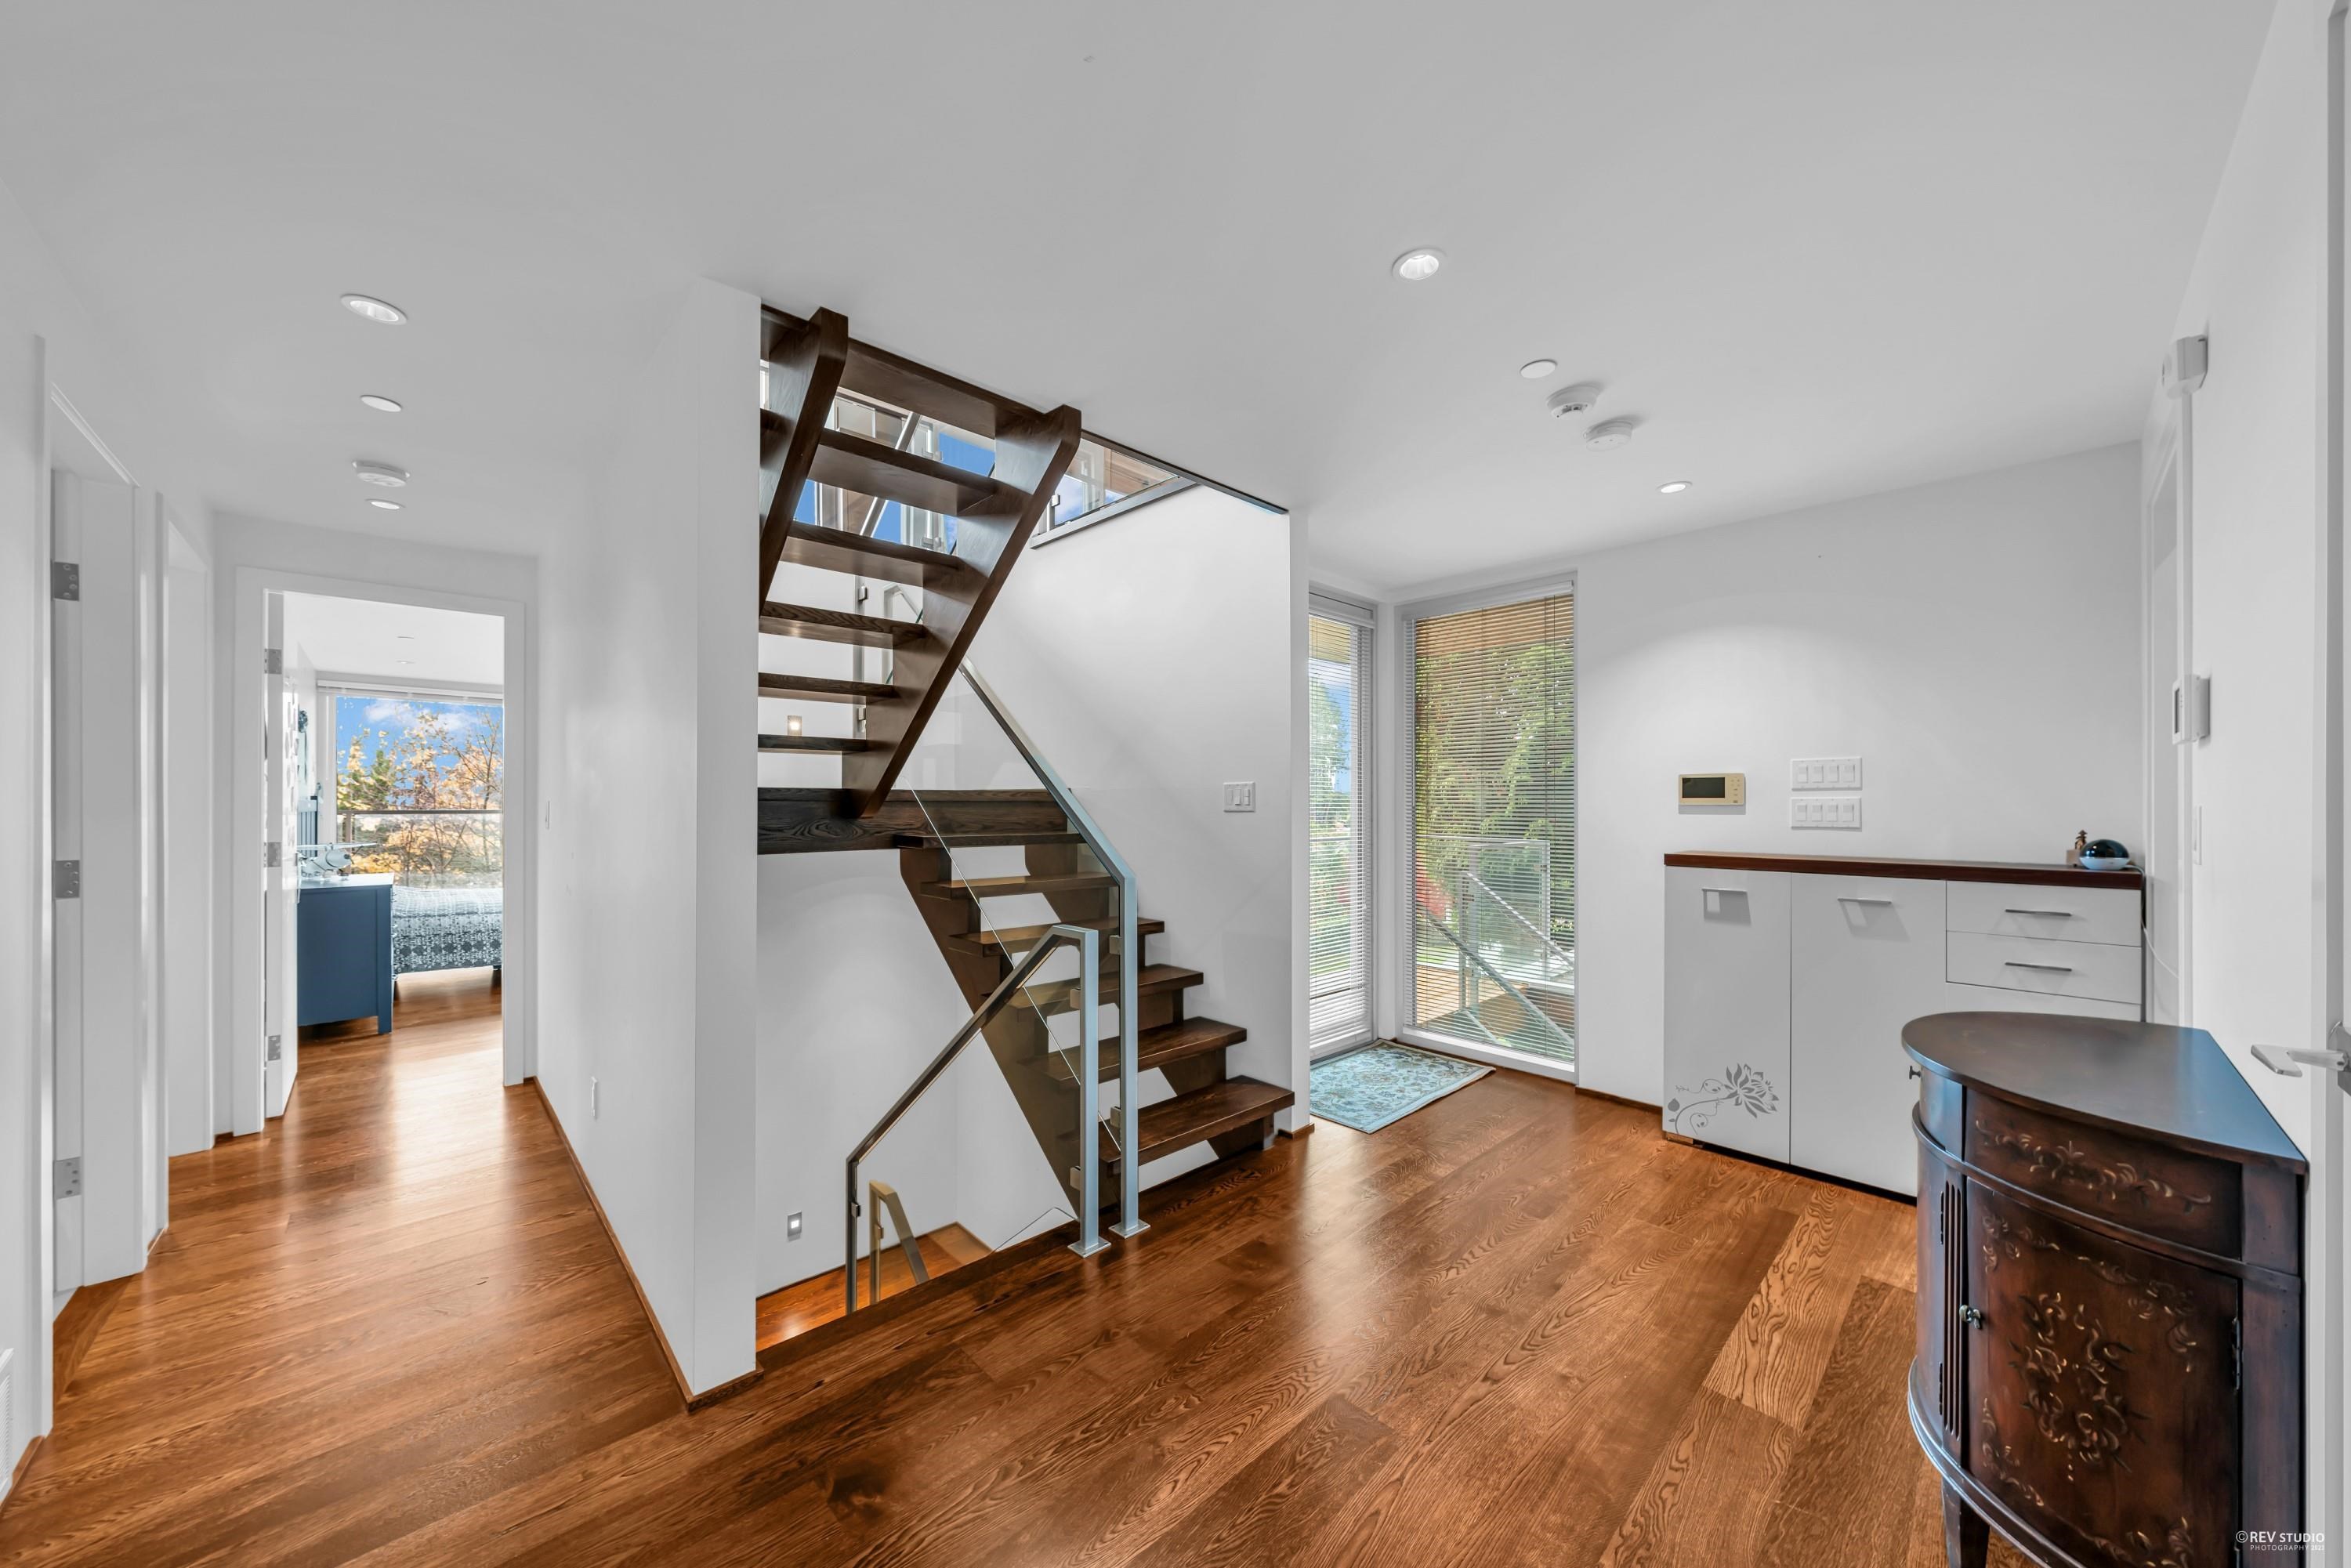 Listing image of 420 N OXLEY STREET